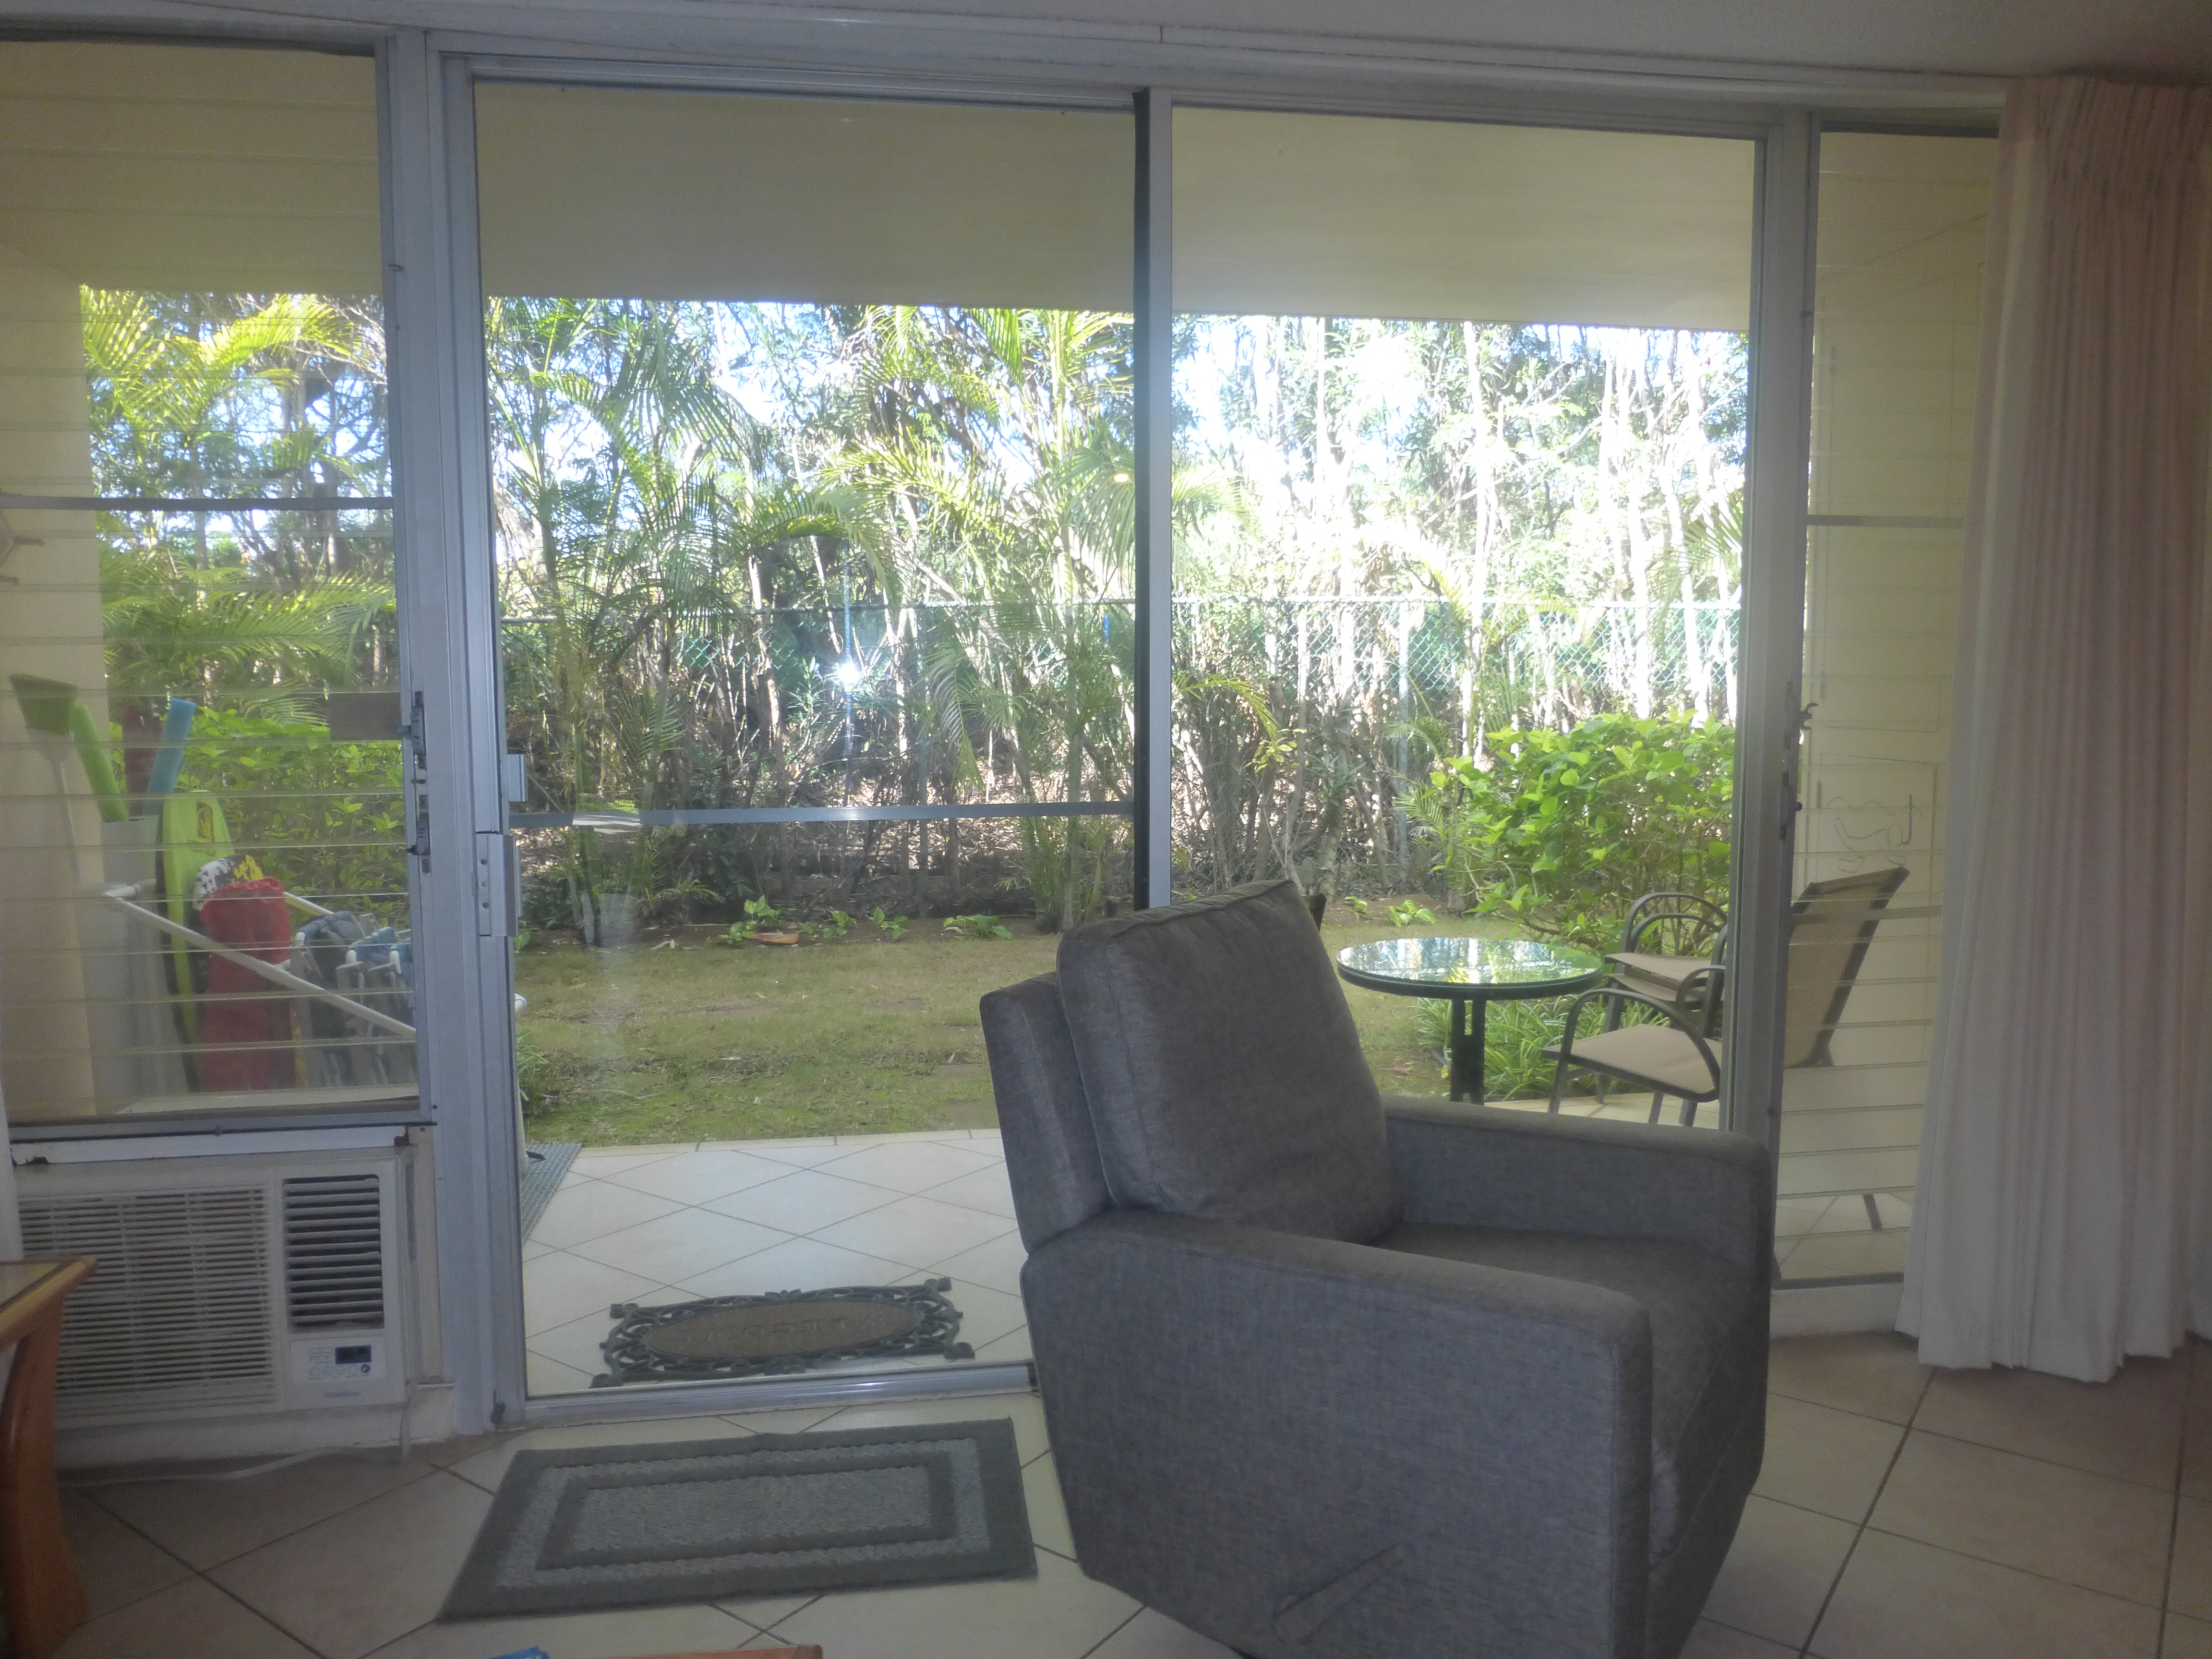 Condo 125 Recliner with view of Lanai